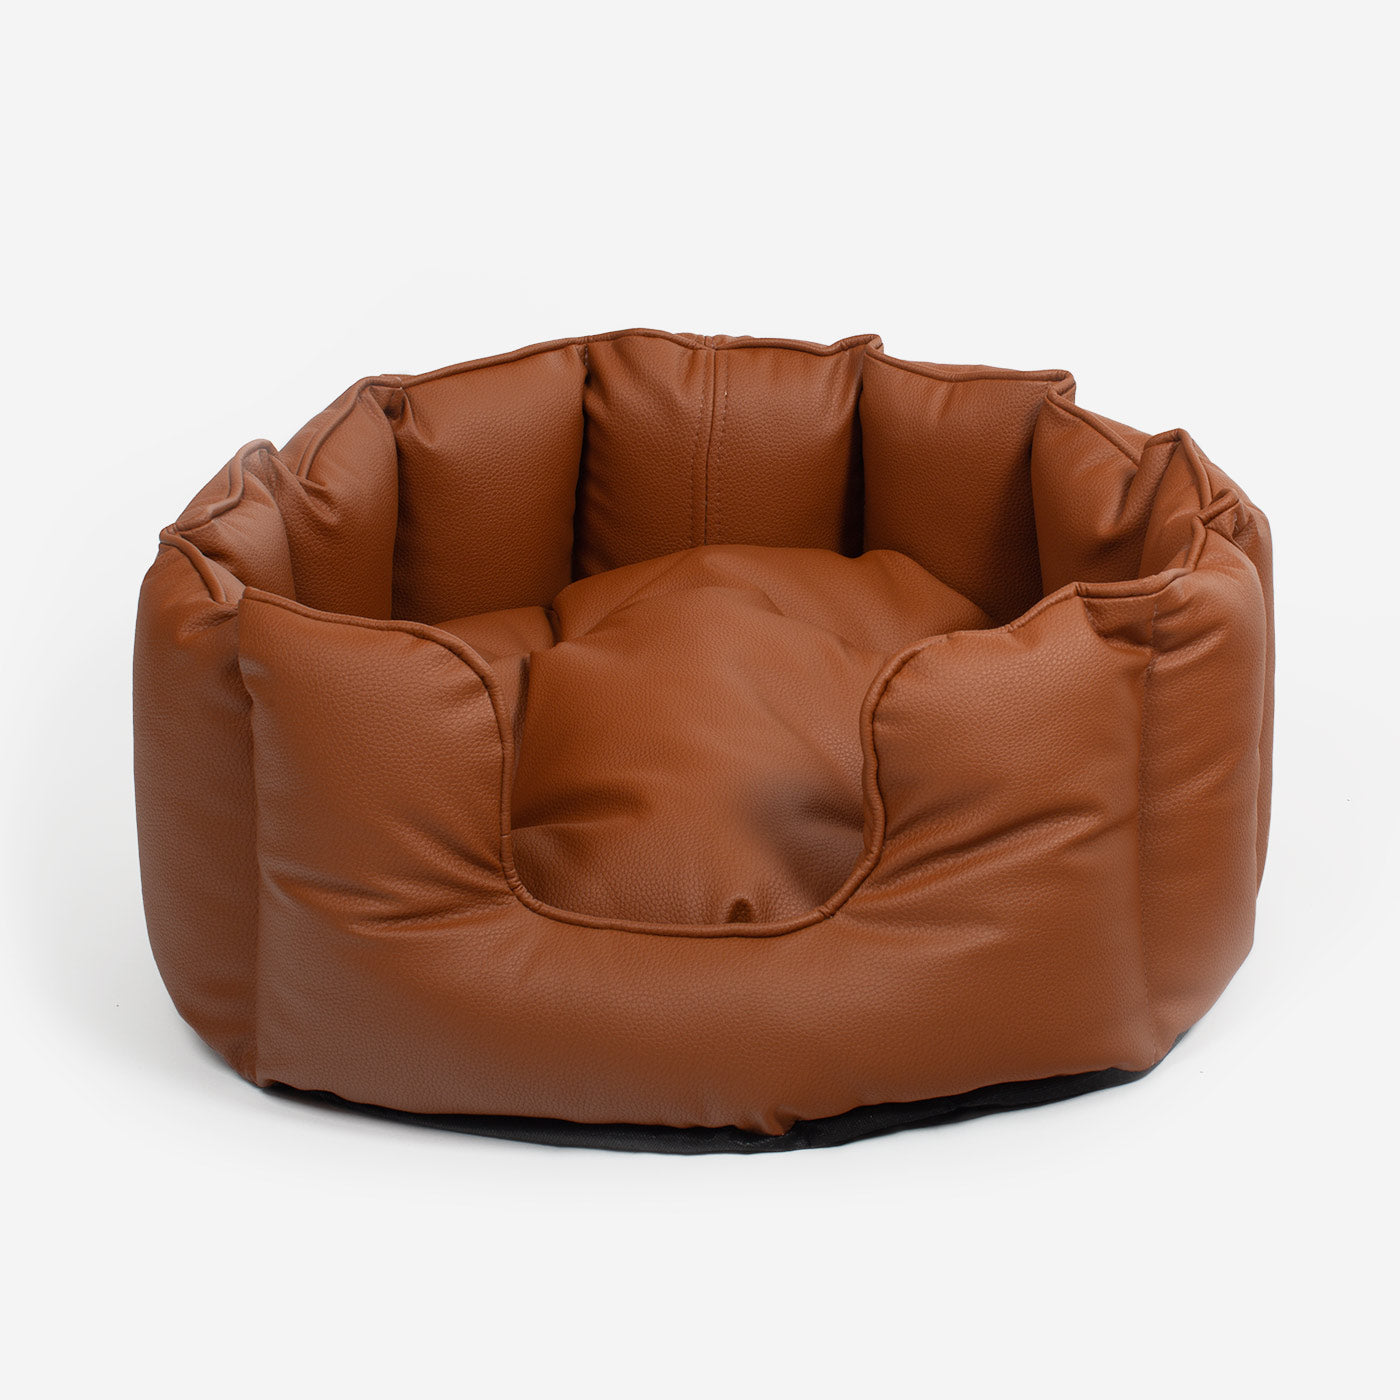 [color:ember] Luxury Handmade High Wall in Rhino Tough Desert Faux Leather, in Ember, Perfect For Your Pets Nap Time! Available To Personalize at Lords & Labradors US